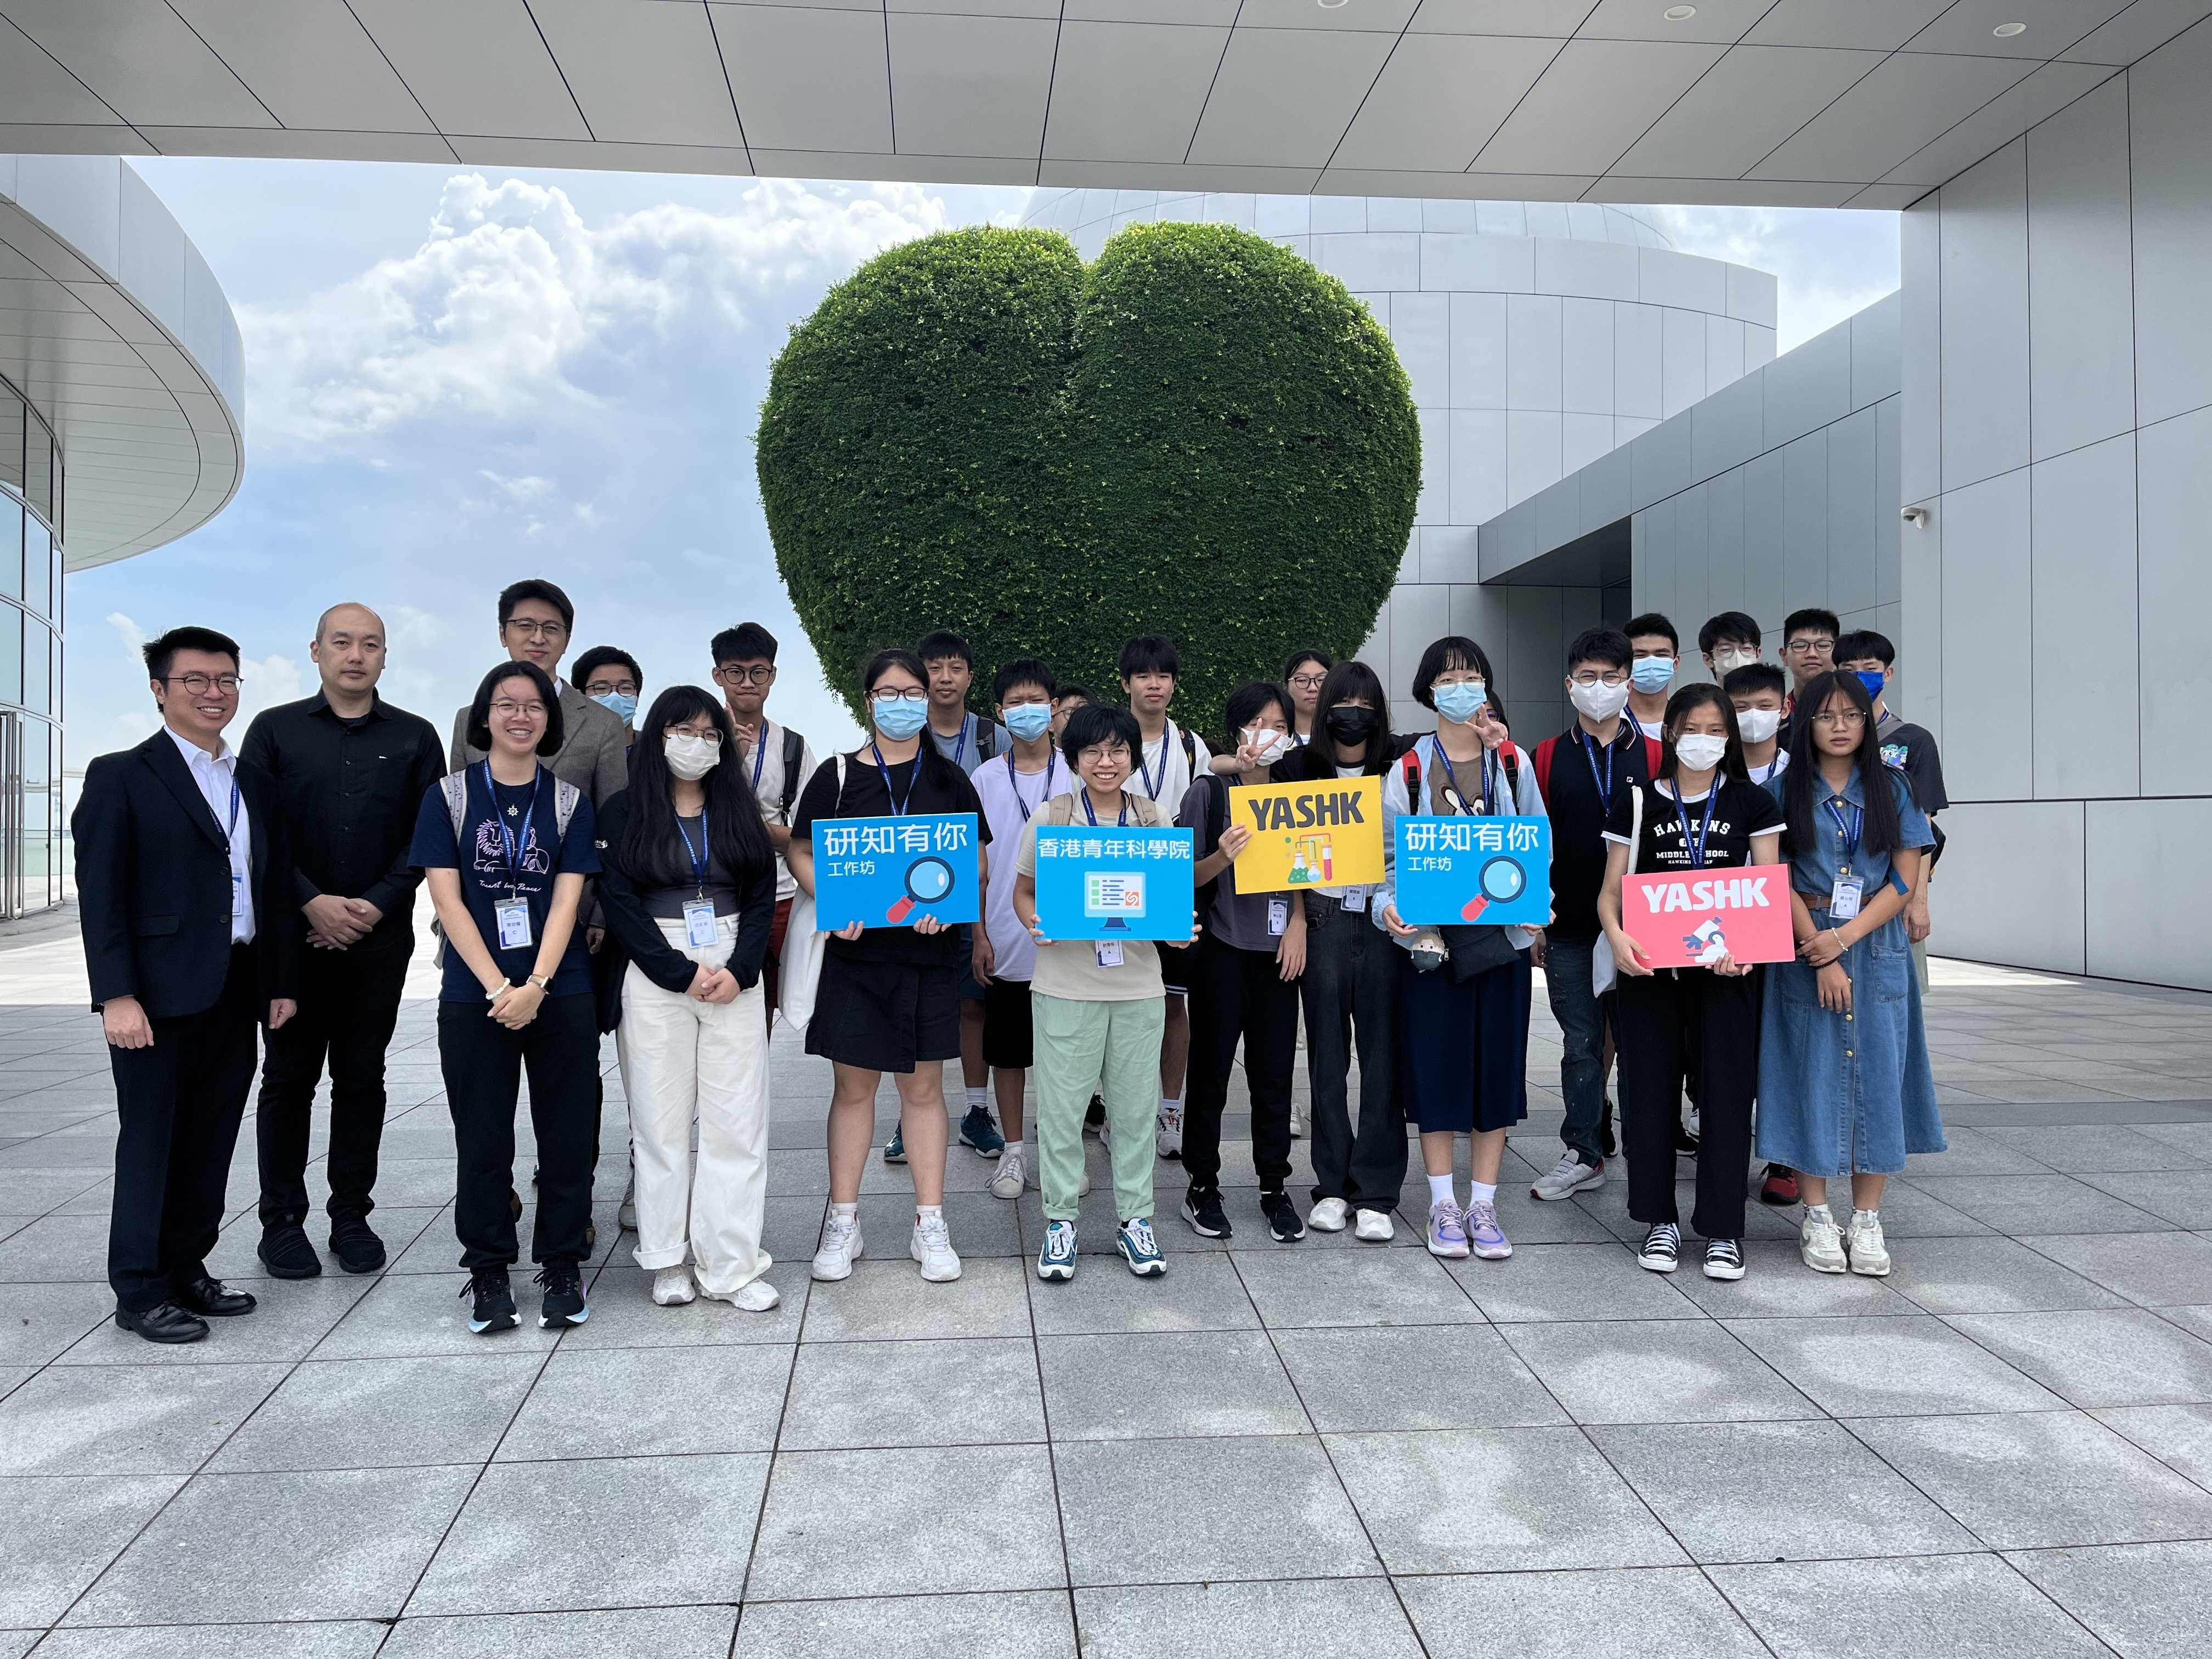 Hong Kong students visited the Macau Science Centre during a trip organised by the Hong Kong Young Academy of Sciences on August 29. Photo: Sue Ng